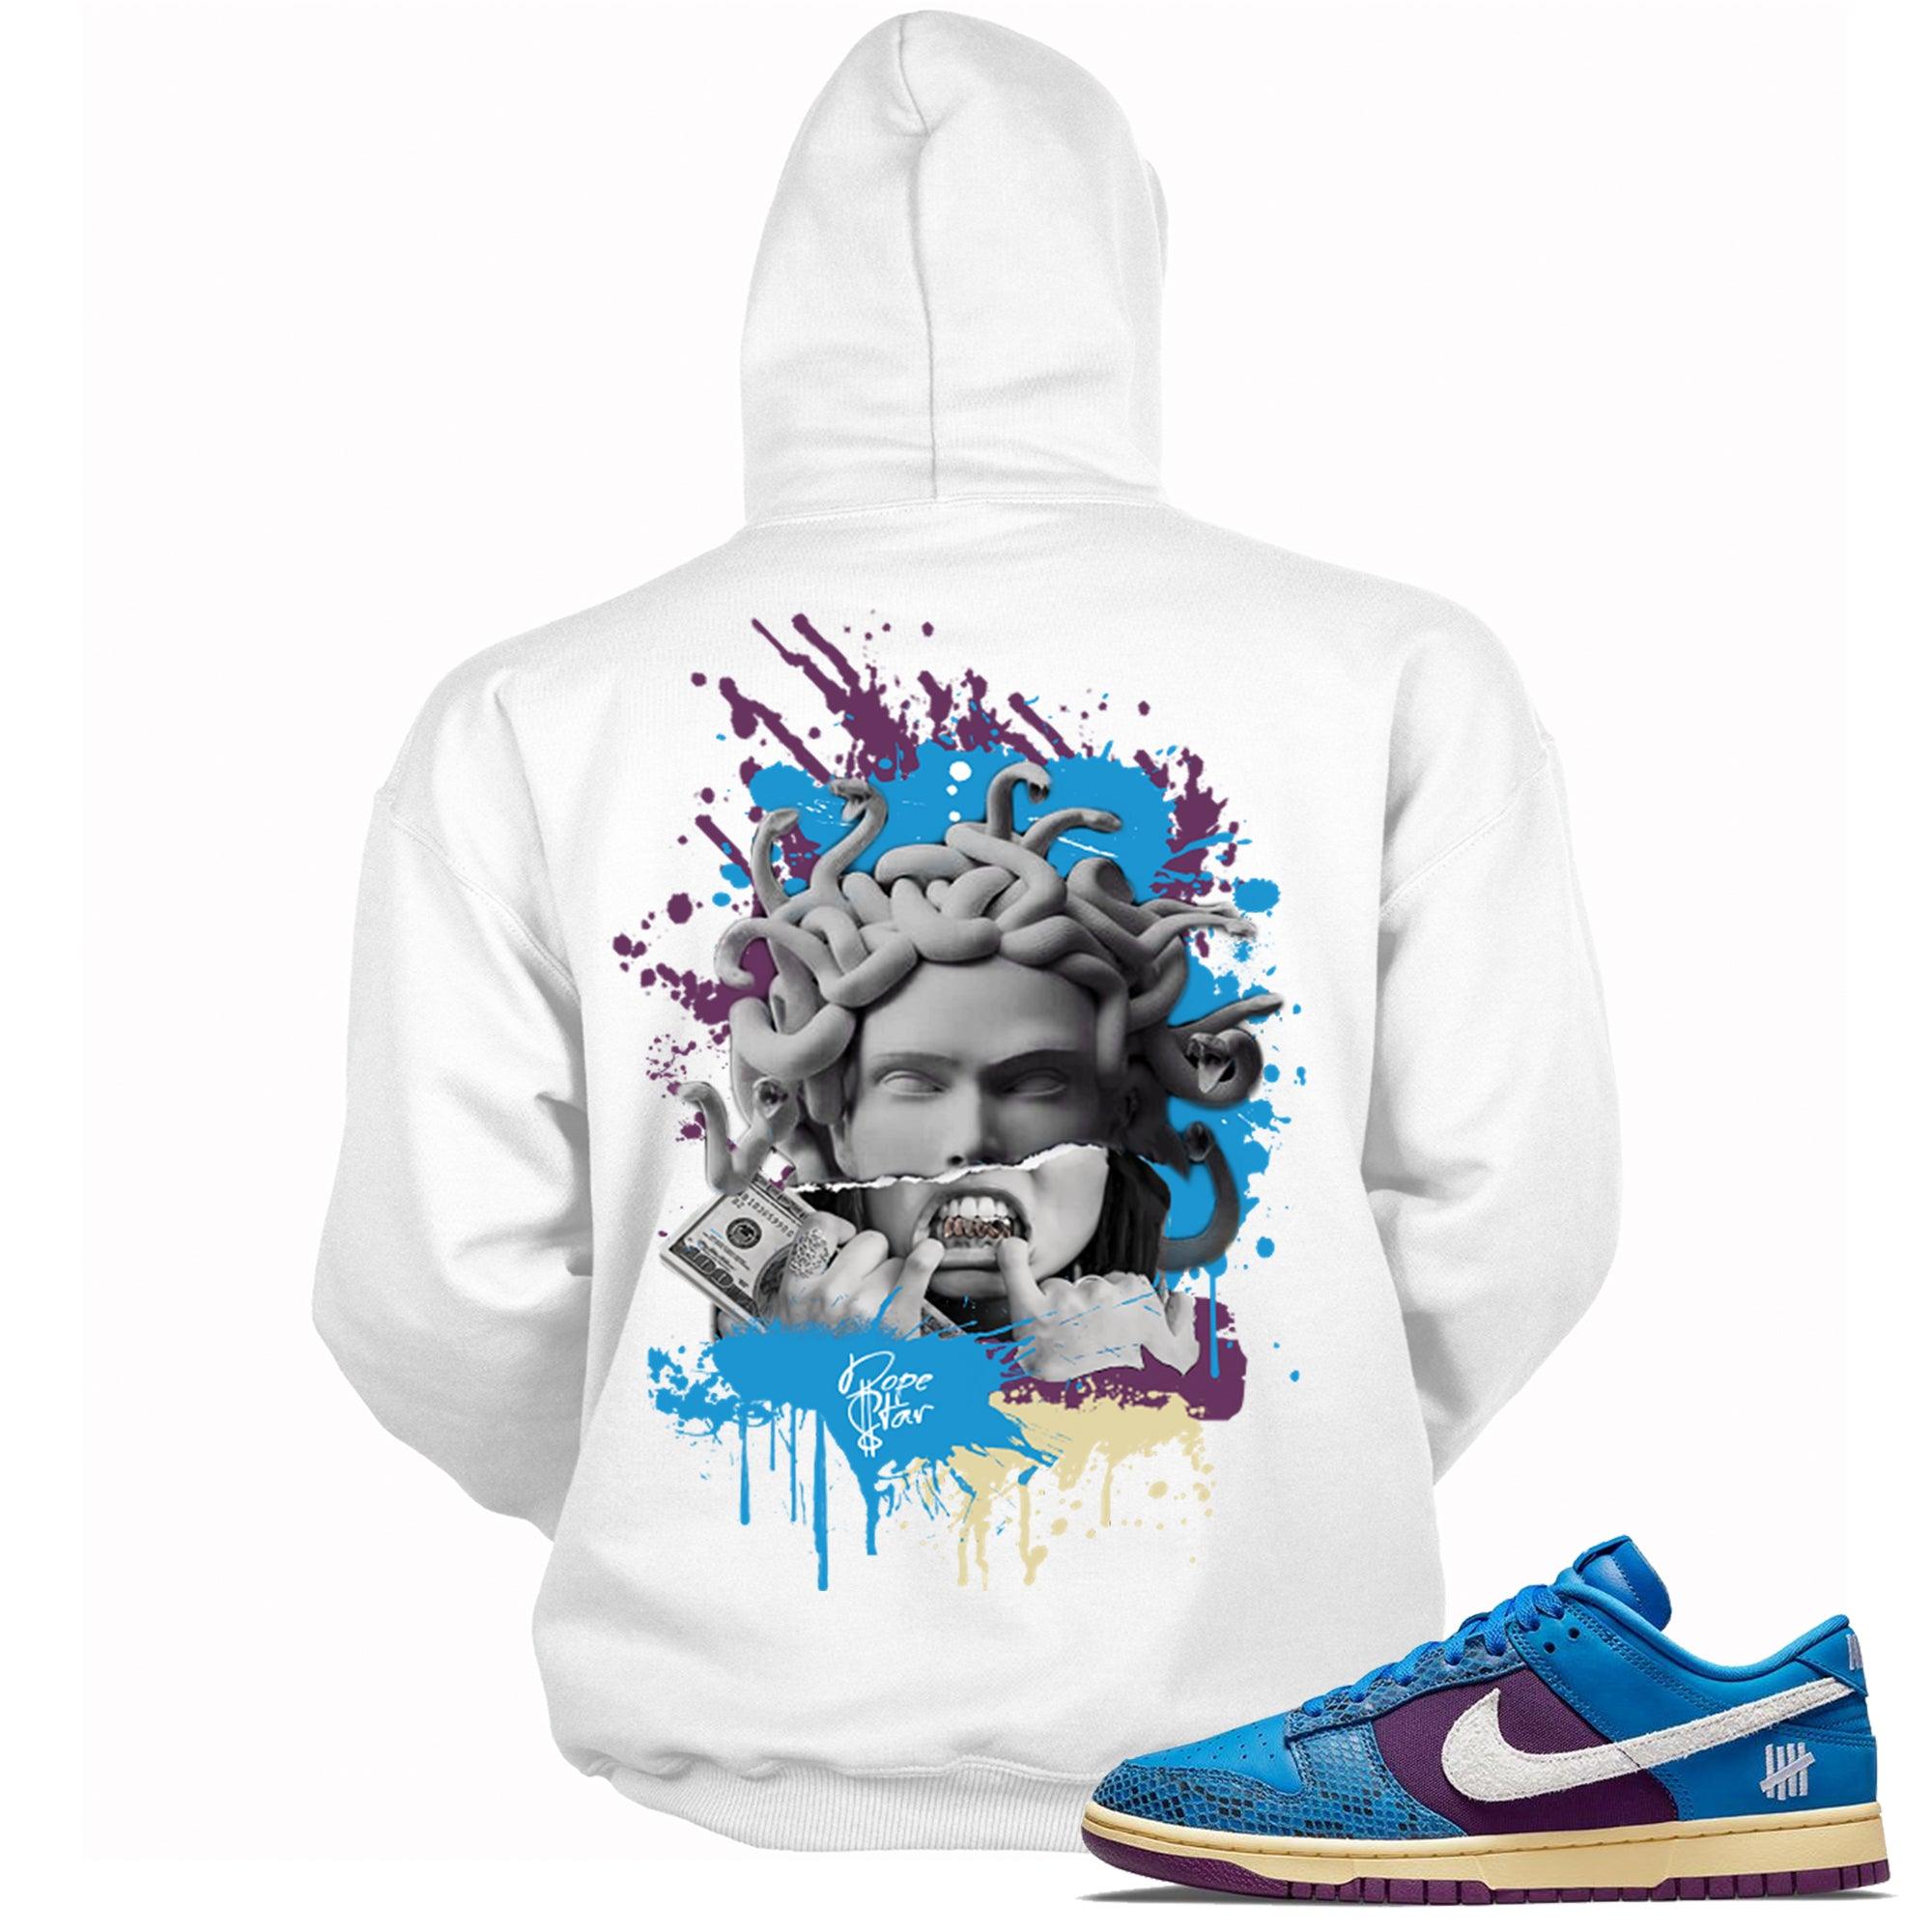 Medusa Hoodie Nike Dunks Low Undefeated 5 On It Dunk vs AF1 photo